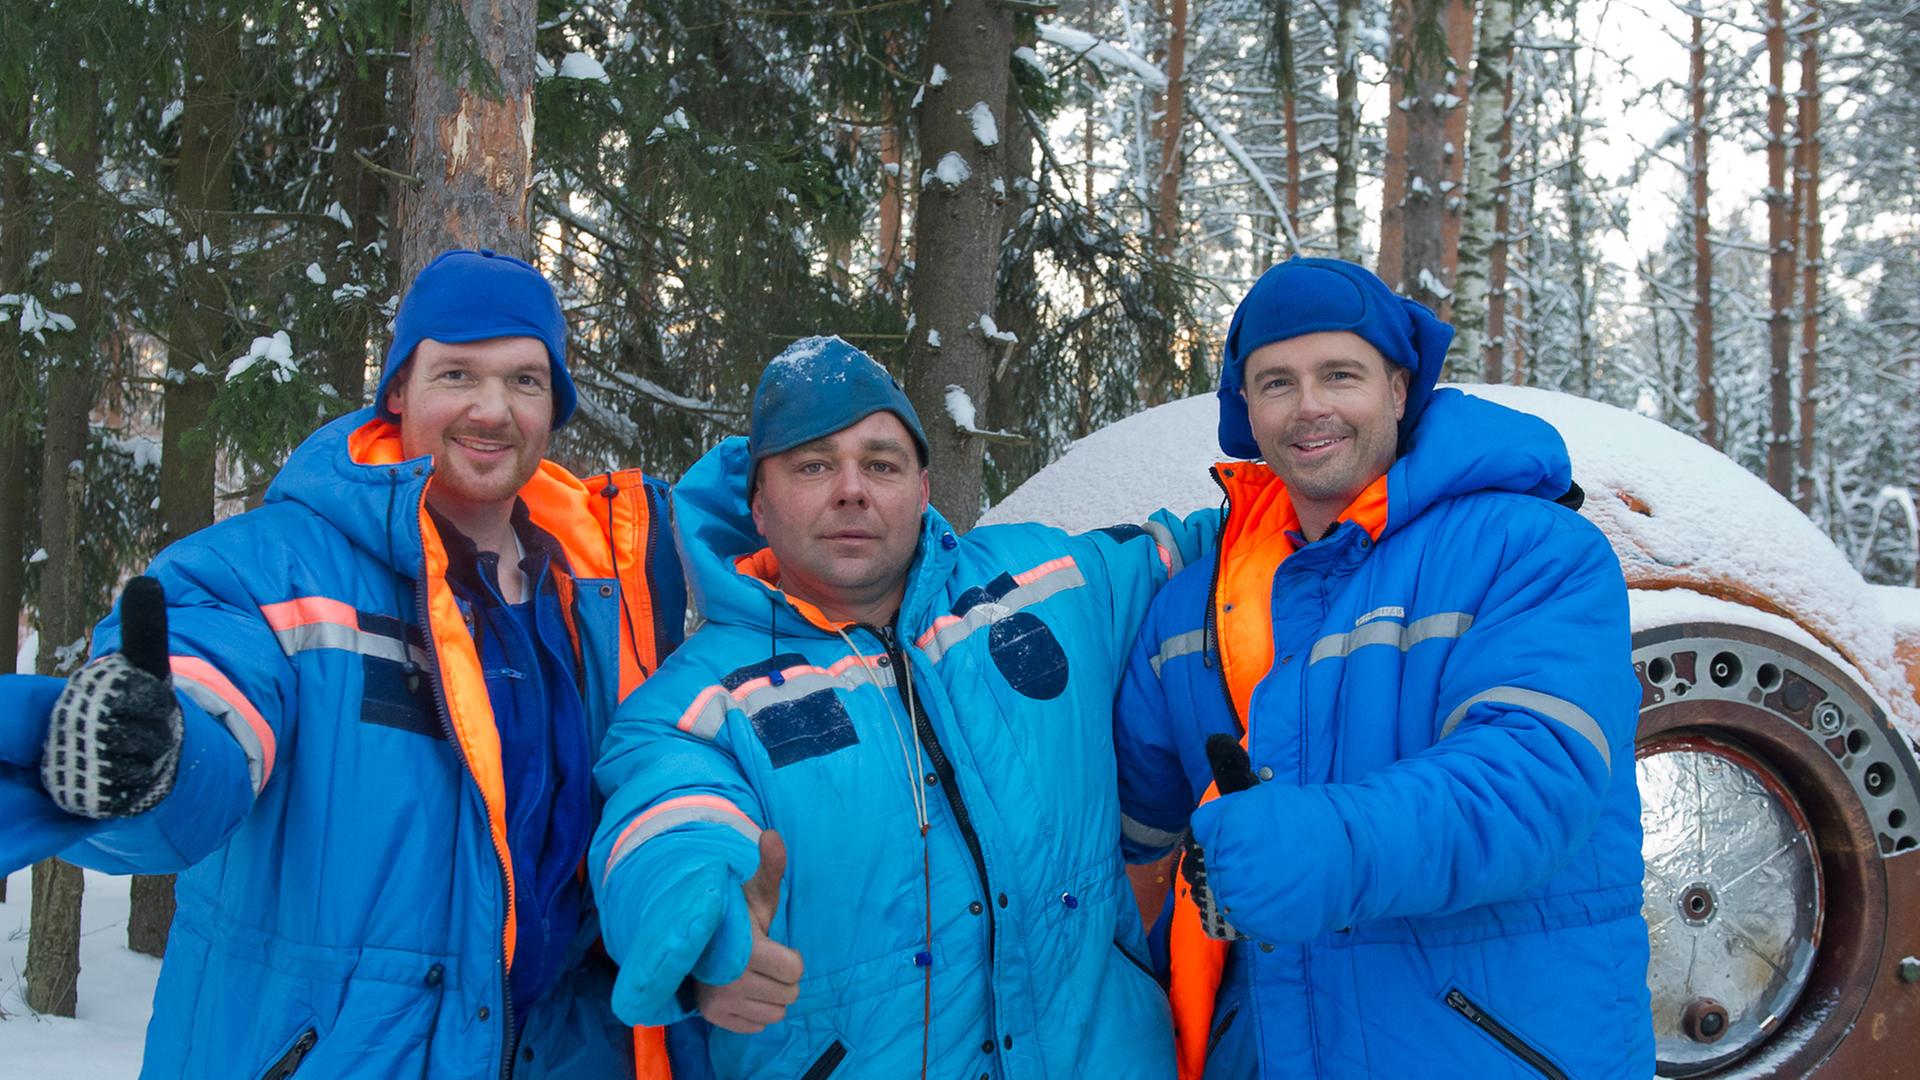 ACHTUNG: Nur zur redaktionellen Verwendung im Zusammenhang mit der aktuellen Berichterstattung und Nennung des Urhebers. ESA astronaut Alexander Gerst (left), Russian cosmonaut Max Suraev and Reid Wiseman of NASA (right) take part in winter survival training near Star City, Russia, on 25 January 2013. Survival training is an important part of all Soyuz mission training. There is always the possibility that a Soyuz spacecraft could land in a remote, cold area. All astronauts have to learn to survive in harsh climates while waiting for rescue. Alexander Gerst is flight engineer for Expedition 40/41, which will be launched to the Station in May 2014 on a long-duration mission to run science experiments and maintain humankind_s space base. Foto: Gagarin Cosmonaut Training Centre